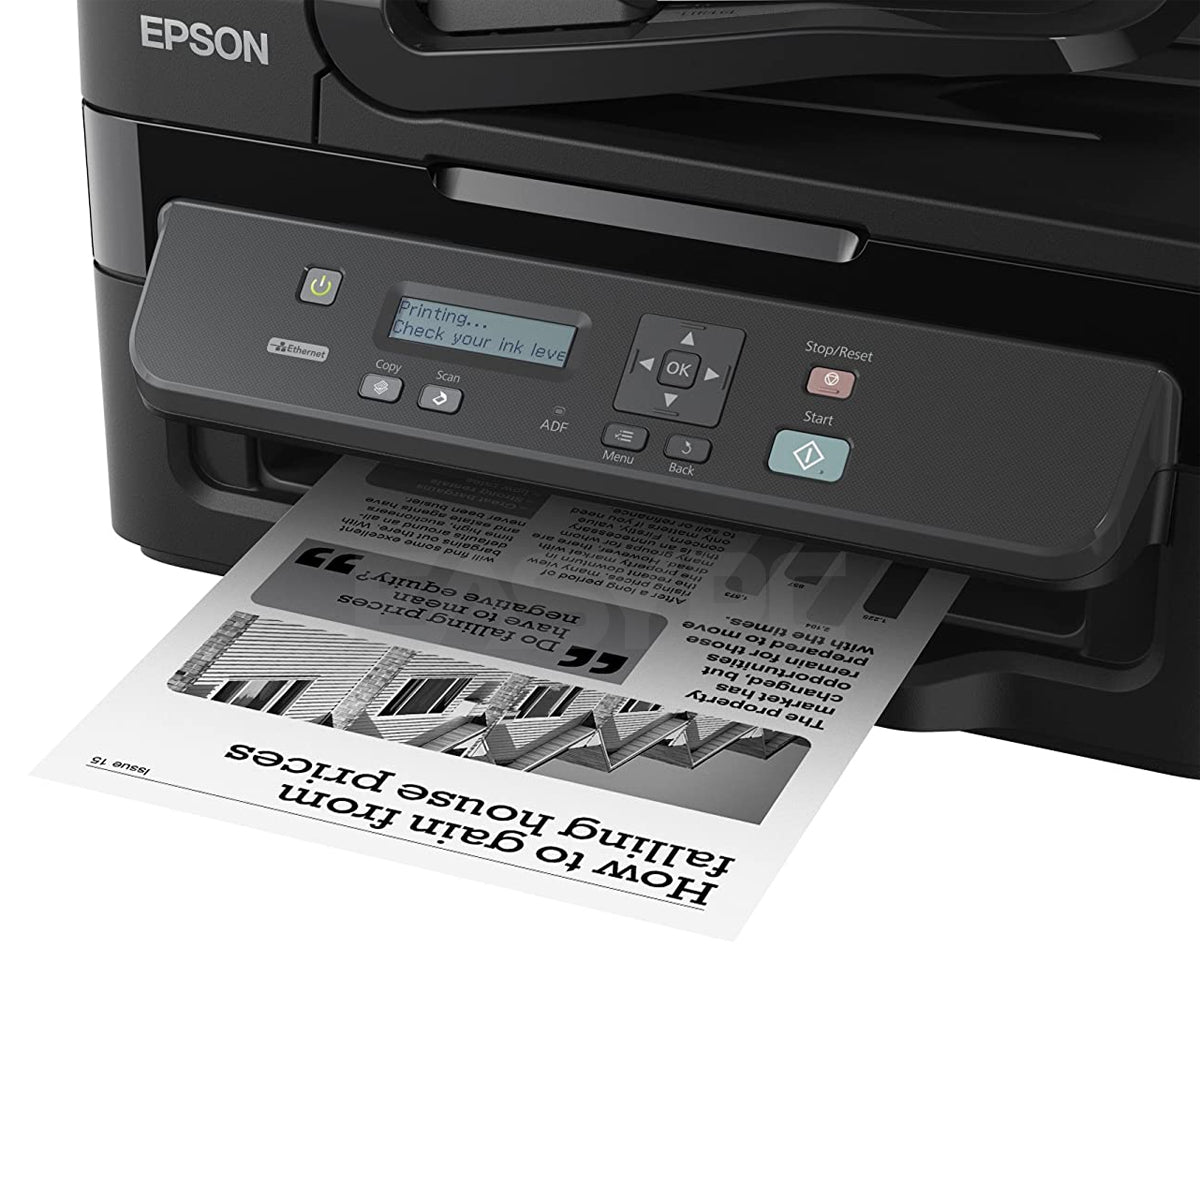 Epson M200 Mono All in One Ink Tank Printer